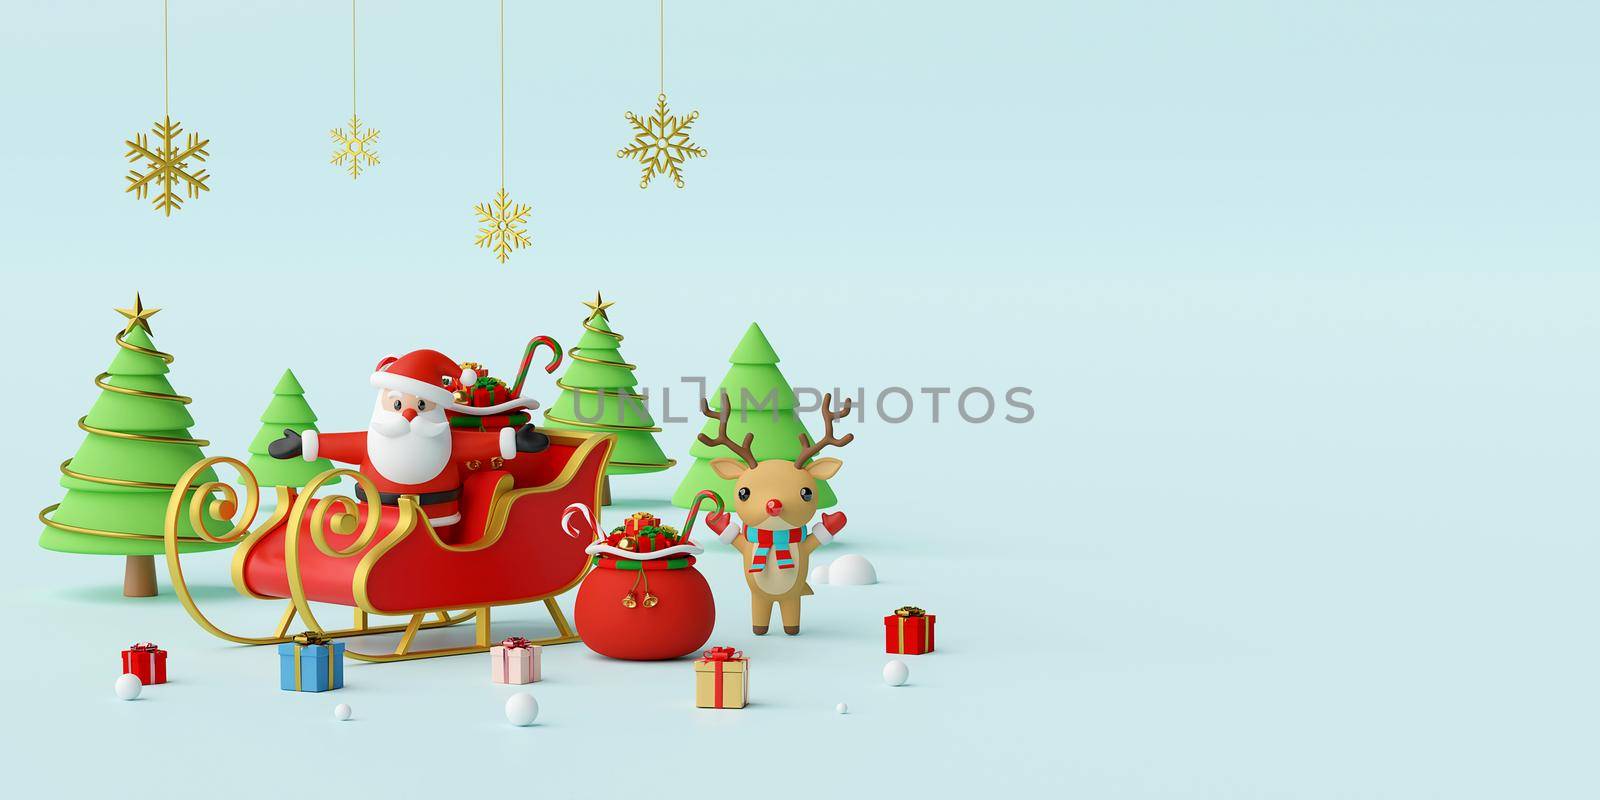 Merry Christmas and Happy New Year, Web banner of Santa Claus on a Sleigh with reindeer and Christmas gifts, 3d rendering